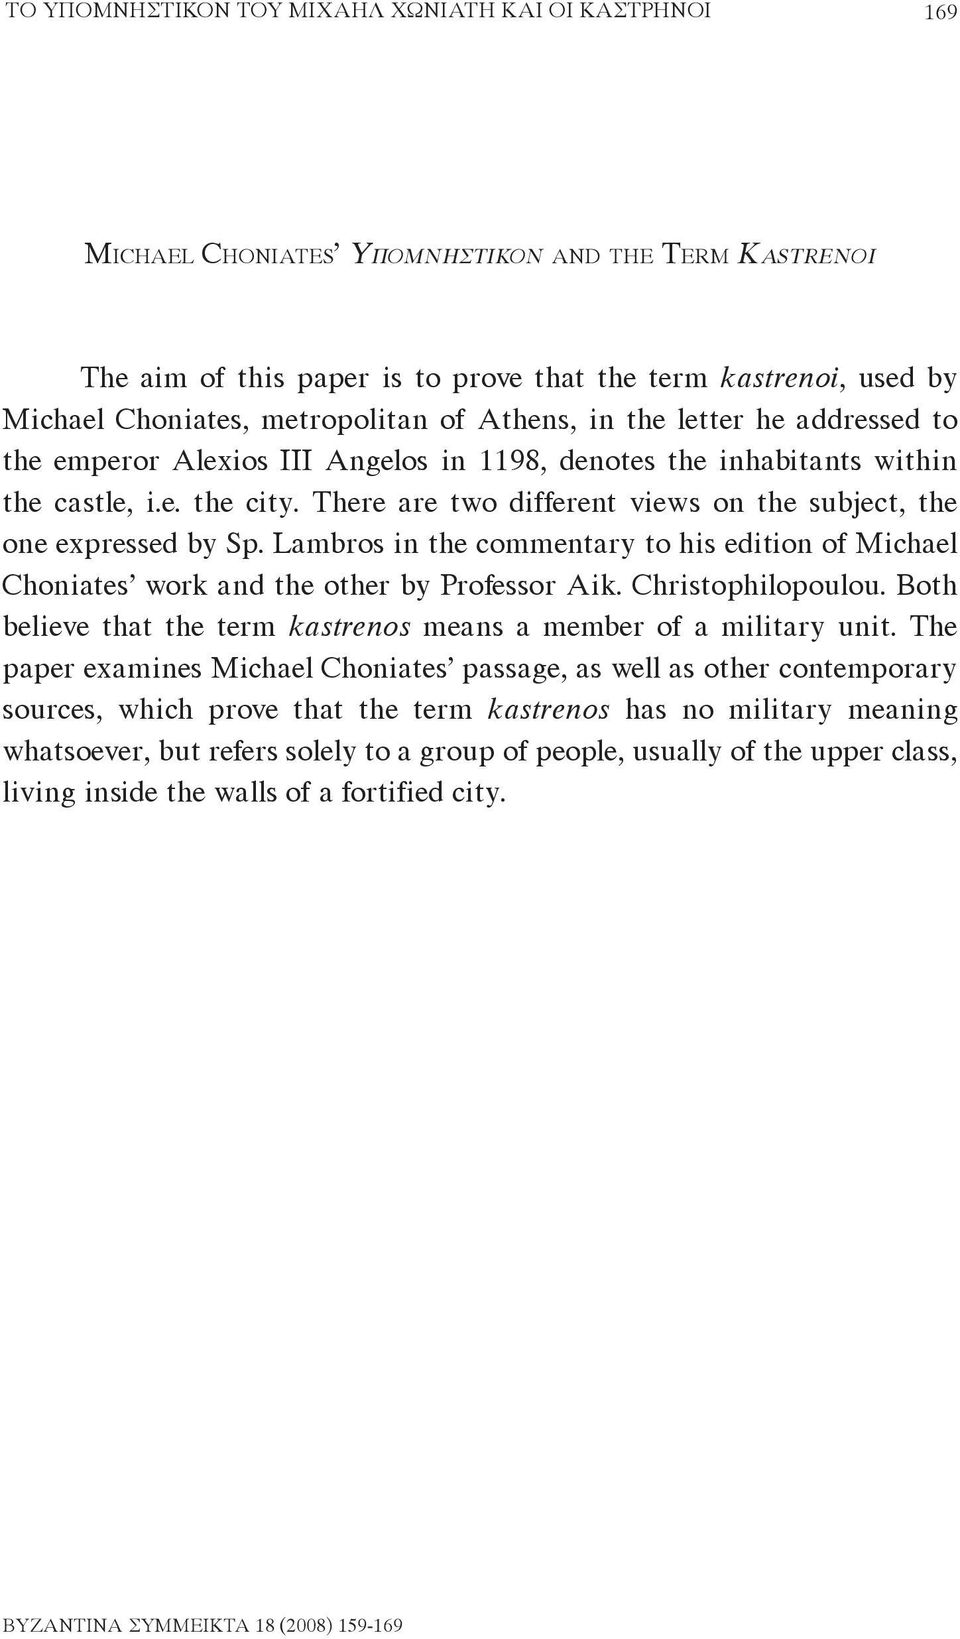 There are two different views on the subject, the one expressed by Sp. Lambros in the commentary to his edition of Michael Choniates work and the other by Professor Aik. Christophilopoulou.